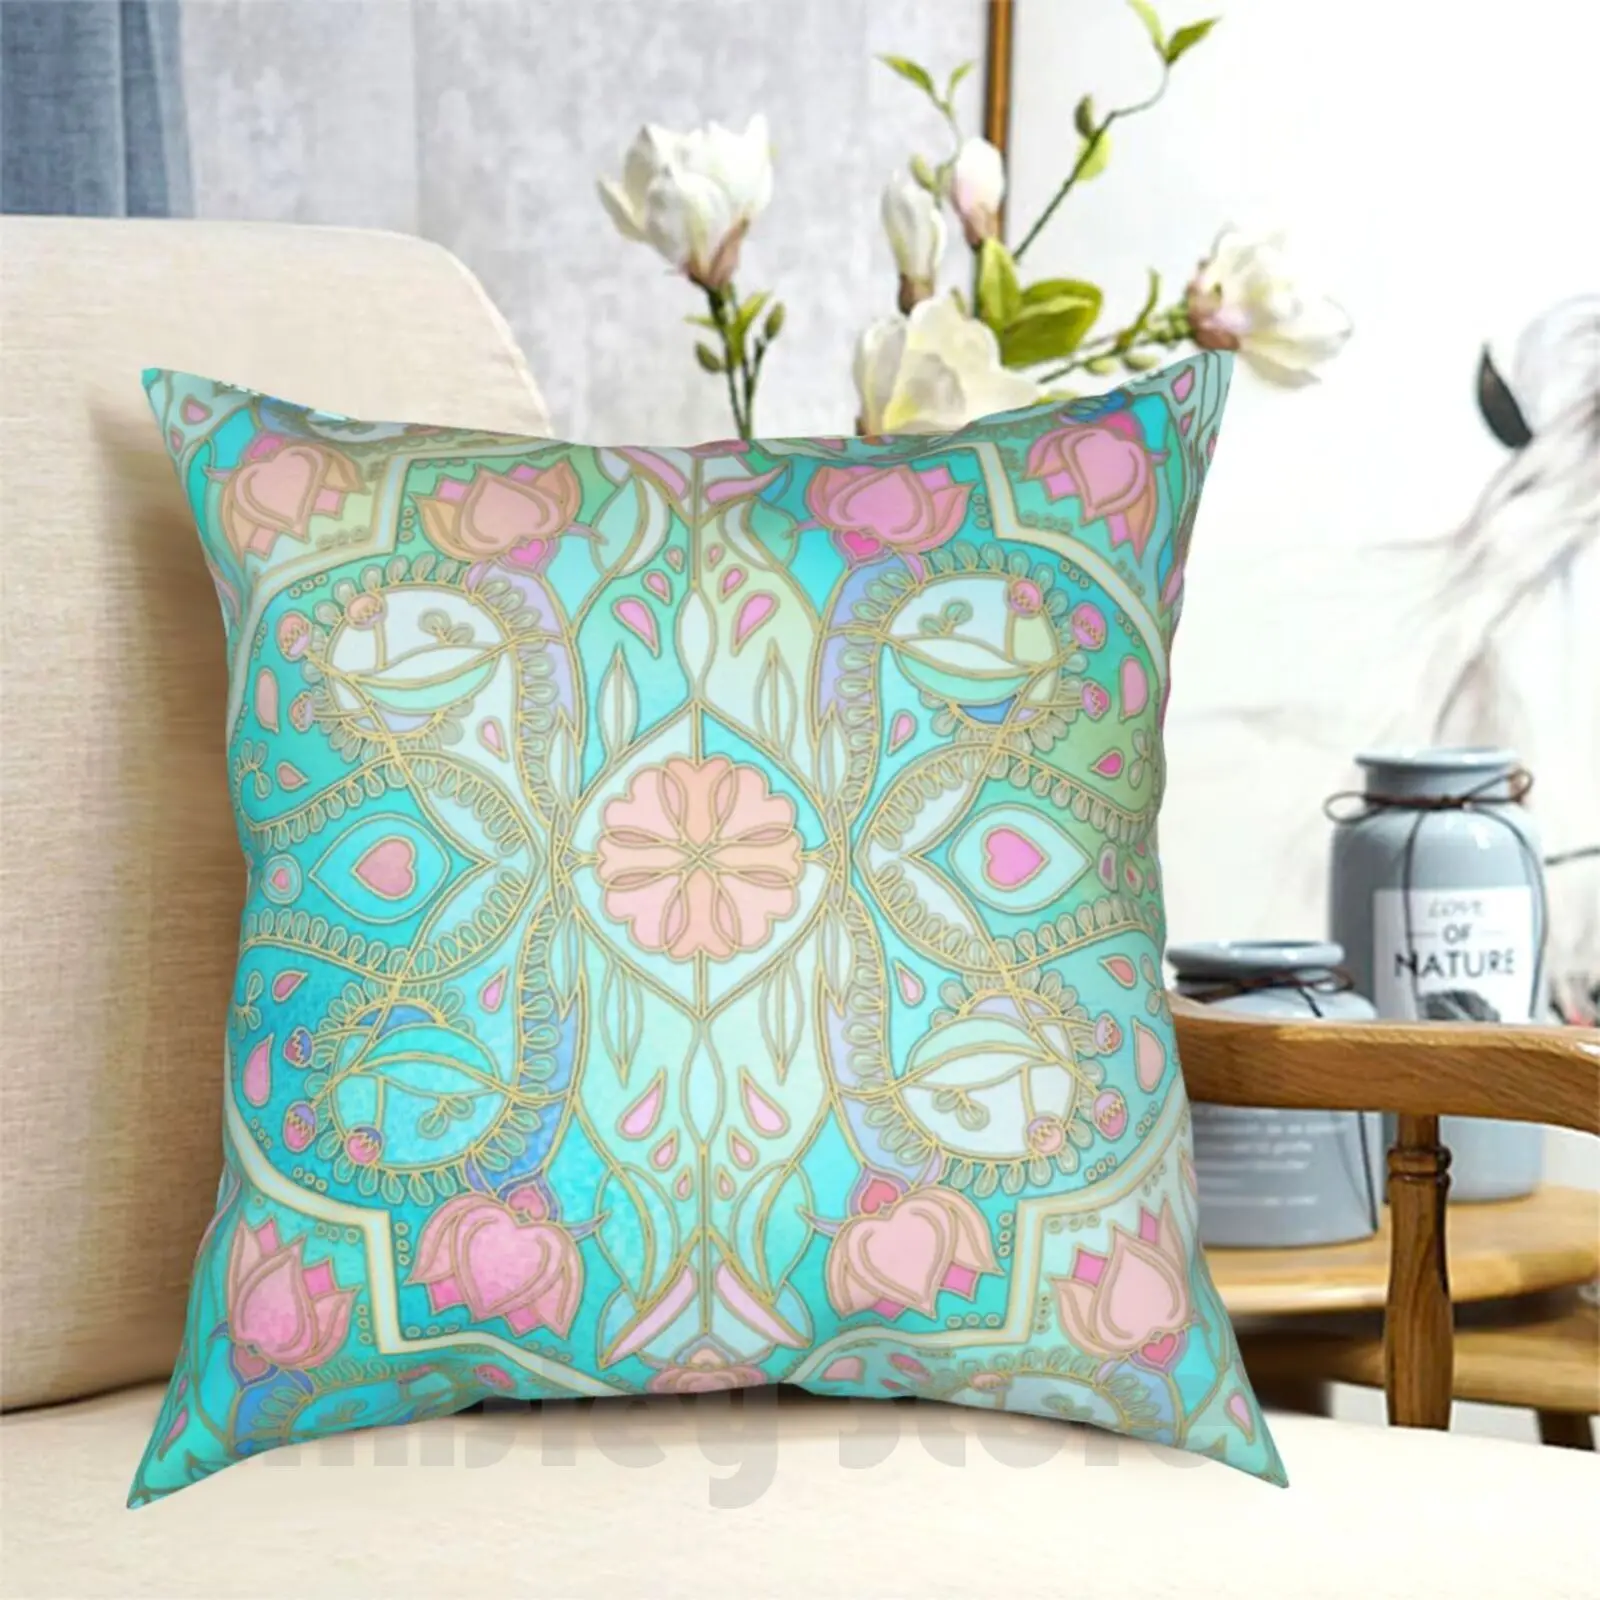 

Floral Moroccan In Spring Pastels-Aqua , Pink , Mint & Peach Pillow Case Printed Home Soft DIY Pillow cover Pattern Pink